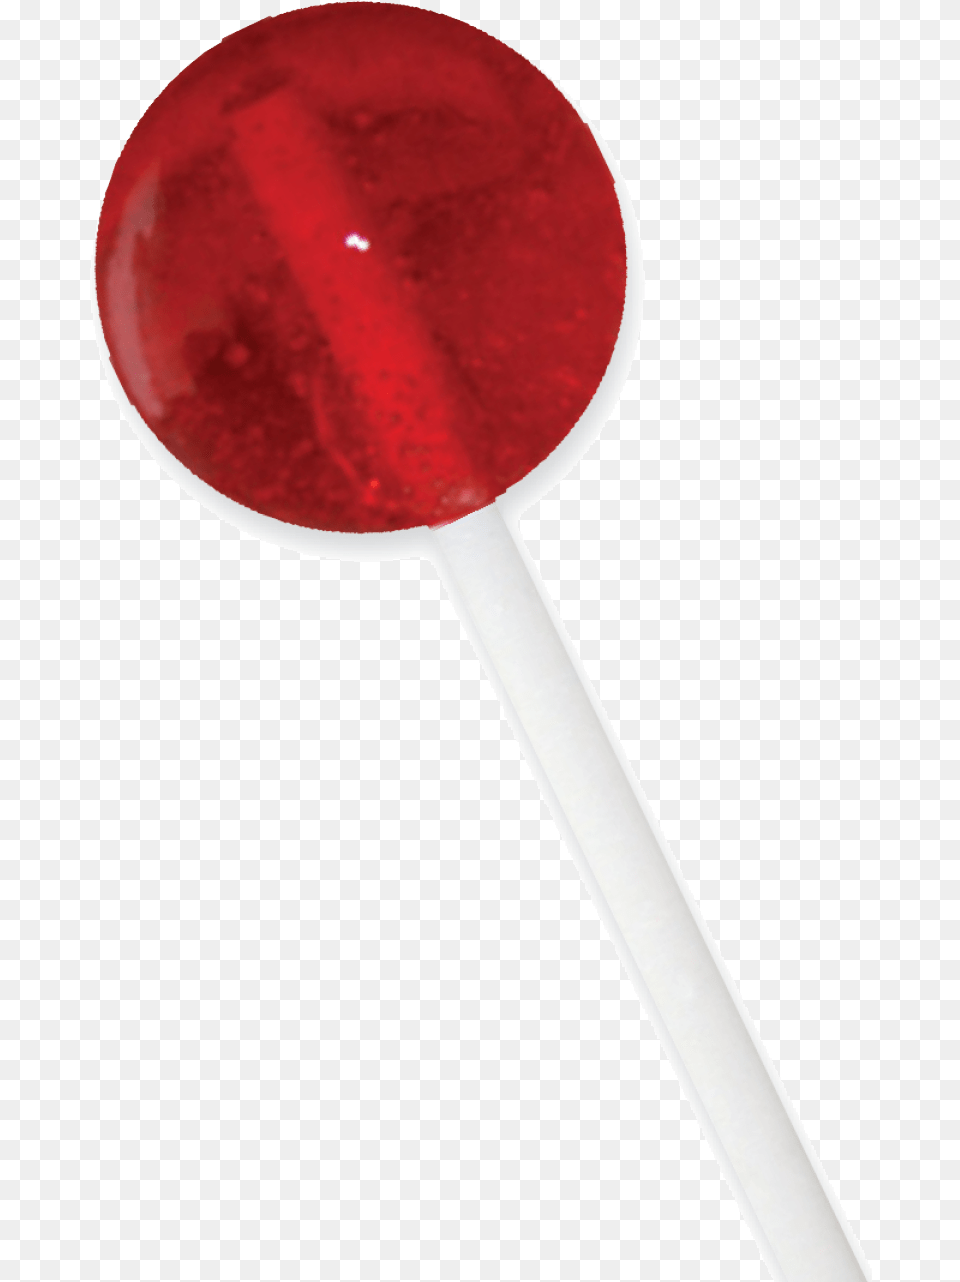 Transparent Lollipop Red Red Candy Lollipops Transparent, Food, Sweets, Appliance, Blow Dryer Png